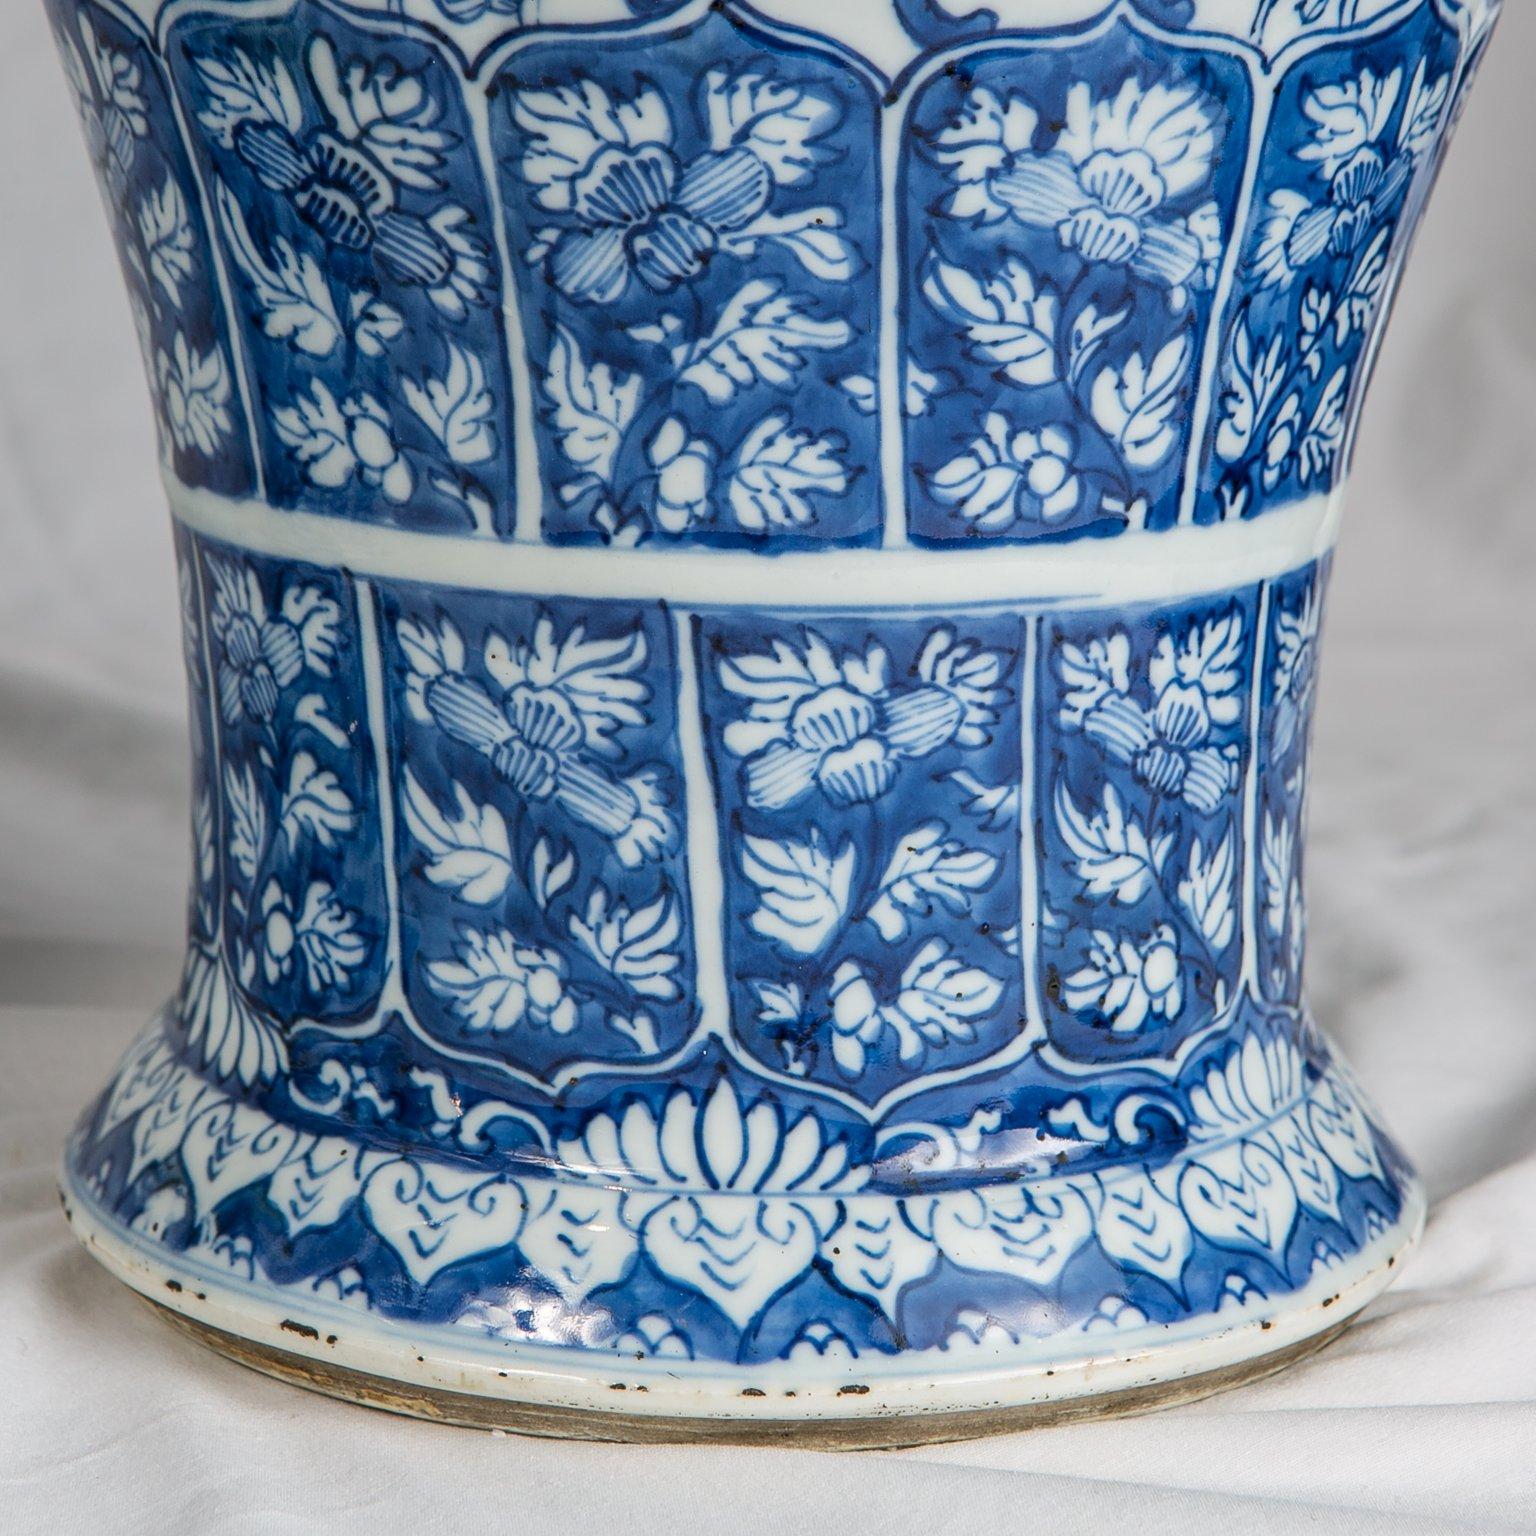 Blue and White Chinese Porcelain Ginger Jars 9